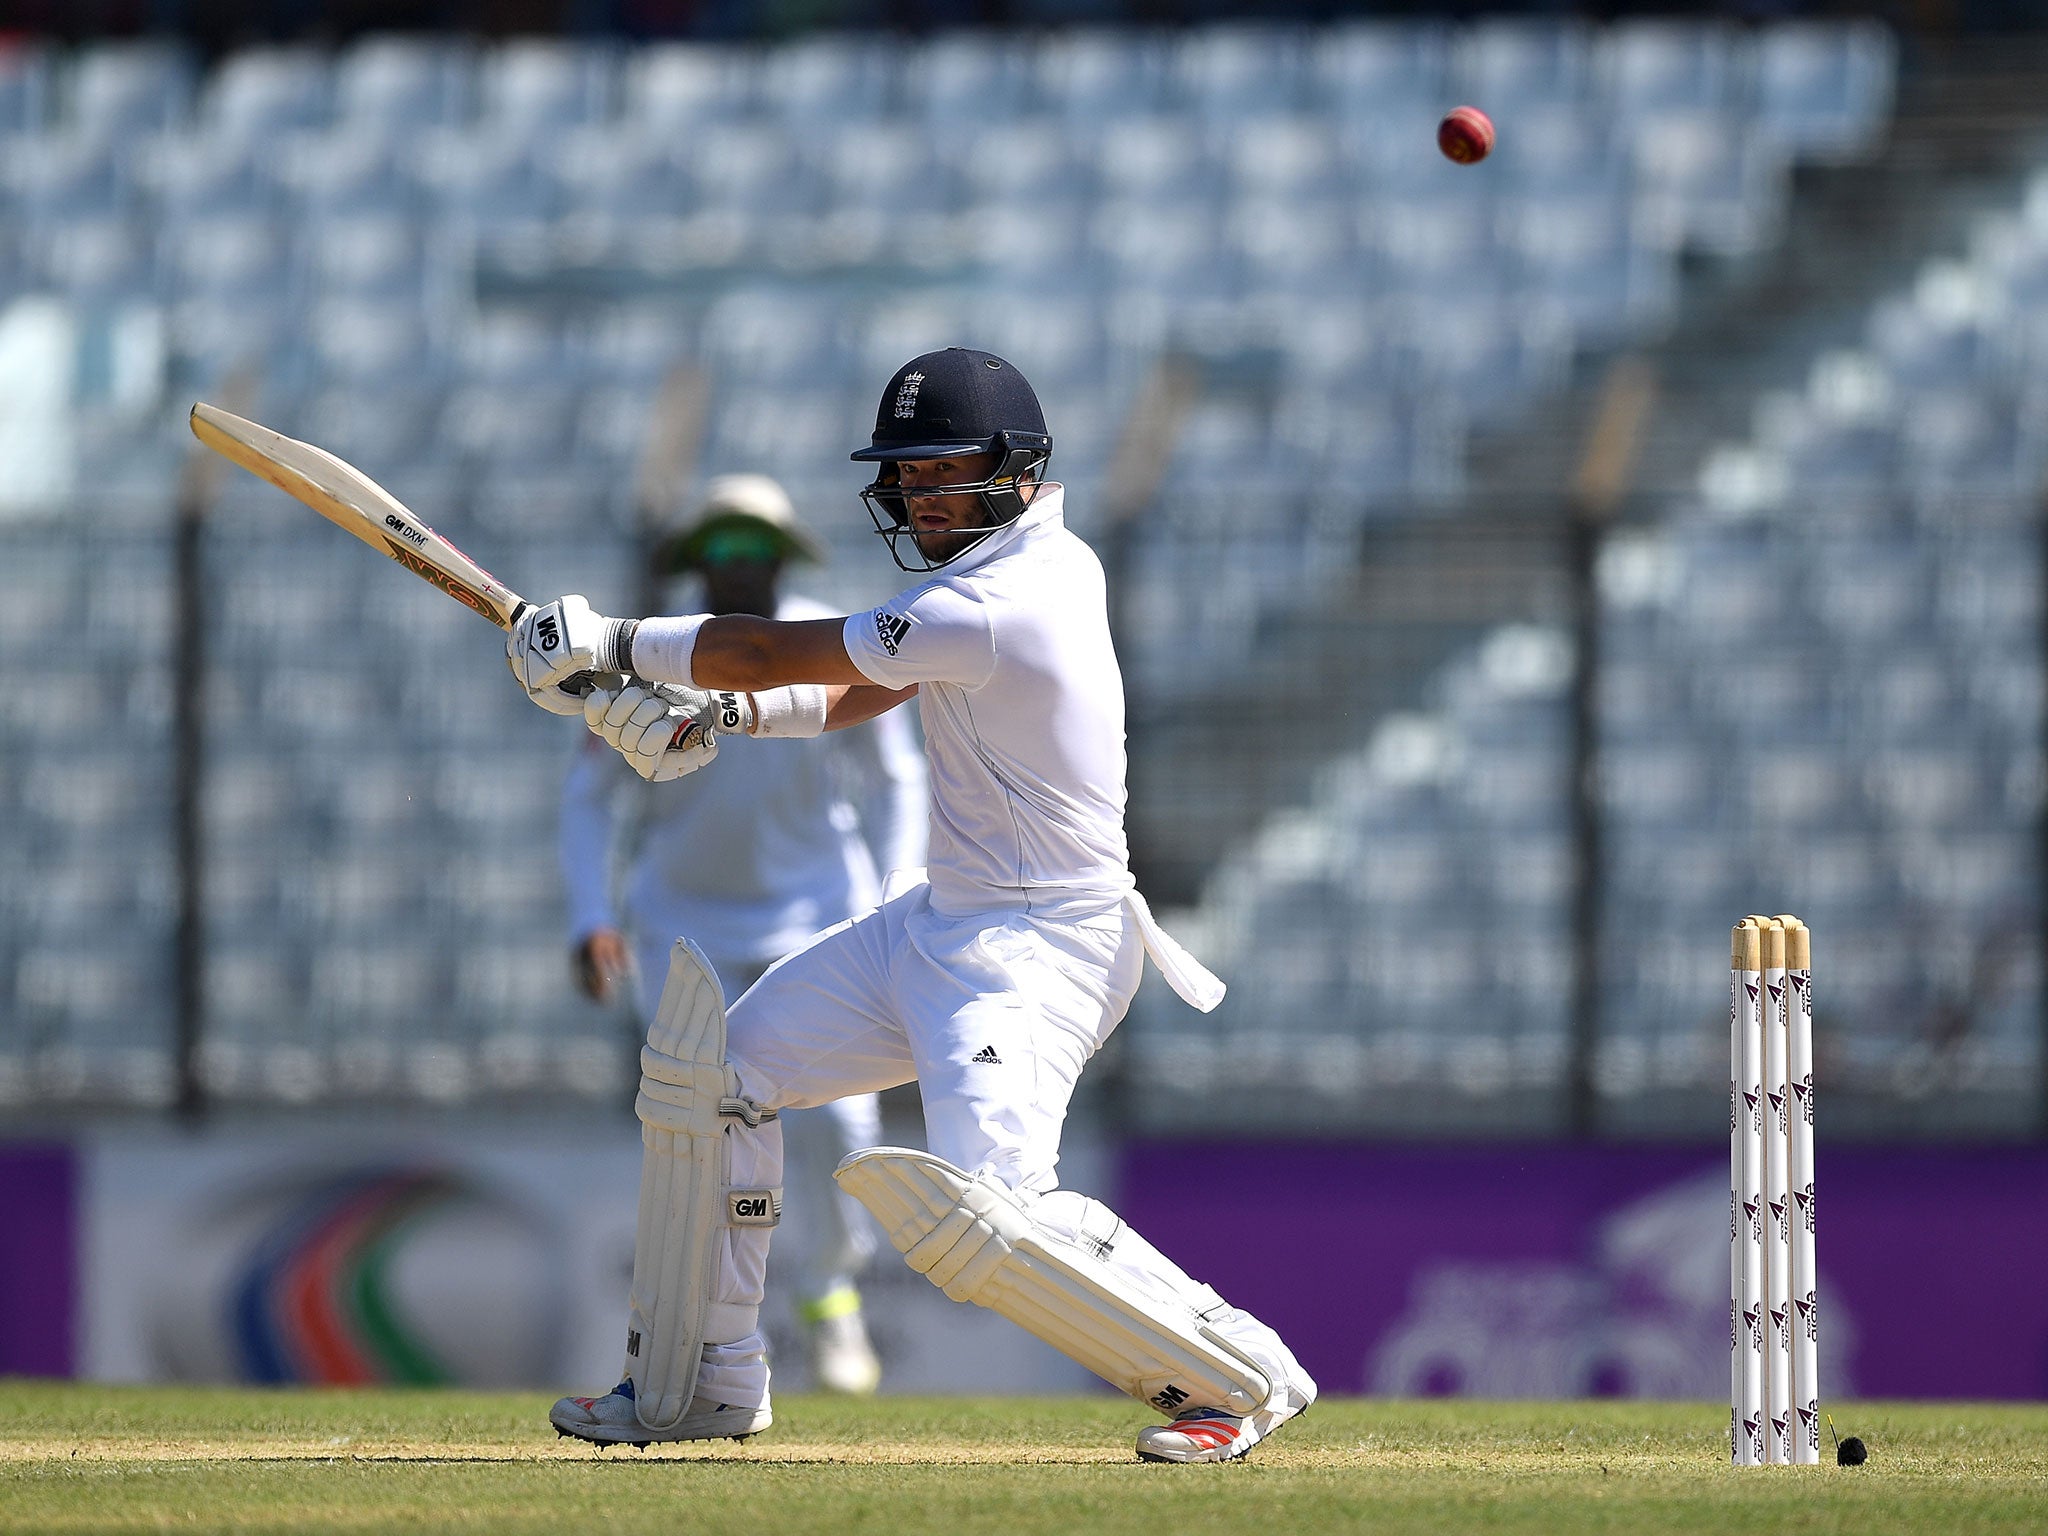 Ben Duckett of England bats during the first Test match between Bangladesh and England at Zohur Ahmed Chowdhury Stadium